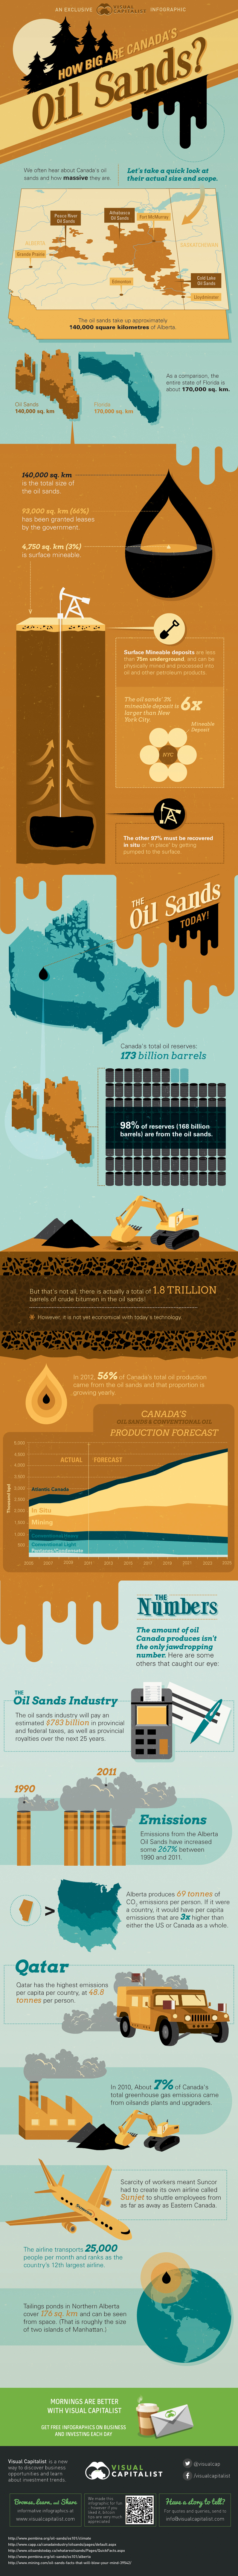 Infographic: How Big Are Canada's Oil Sands?